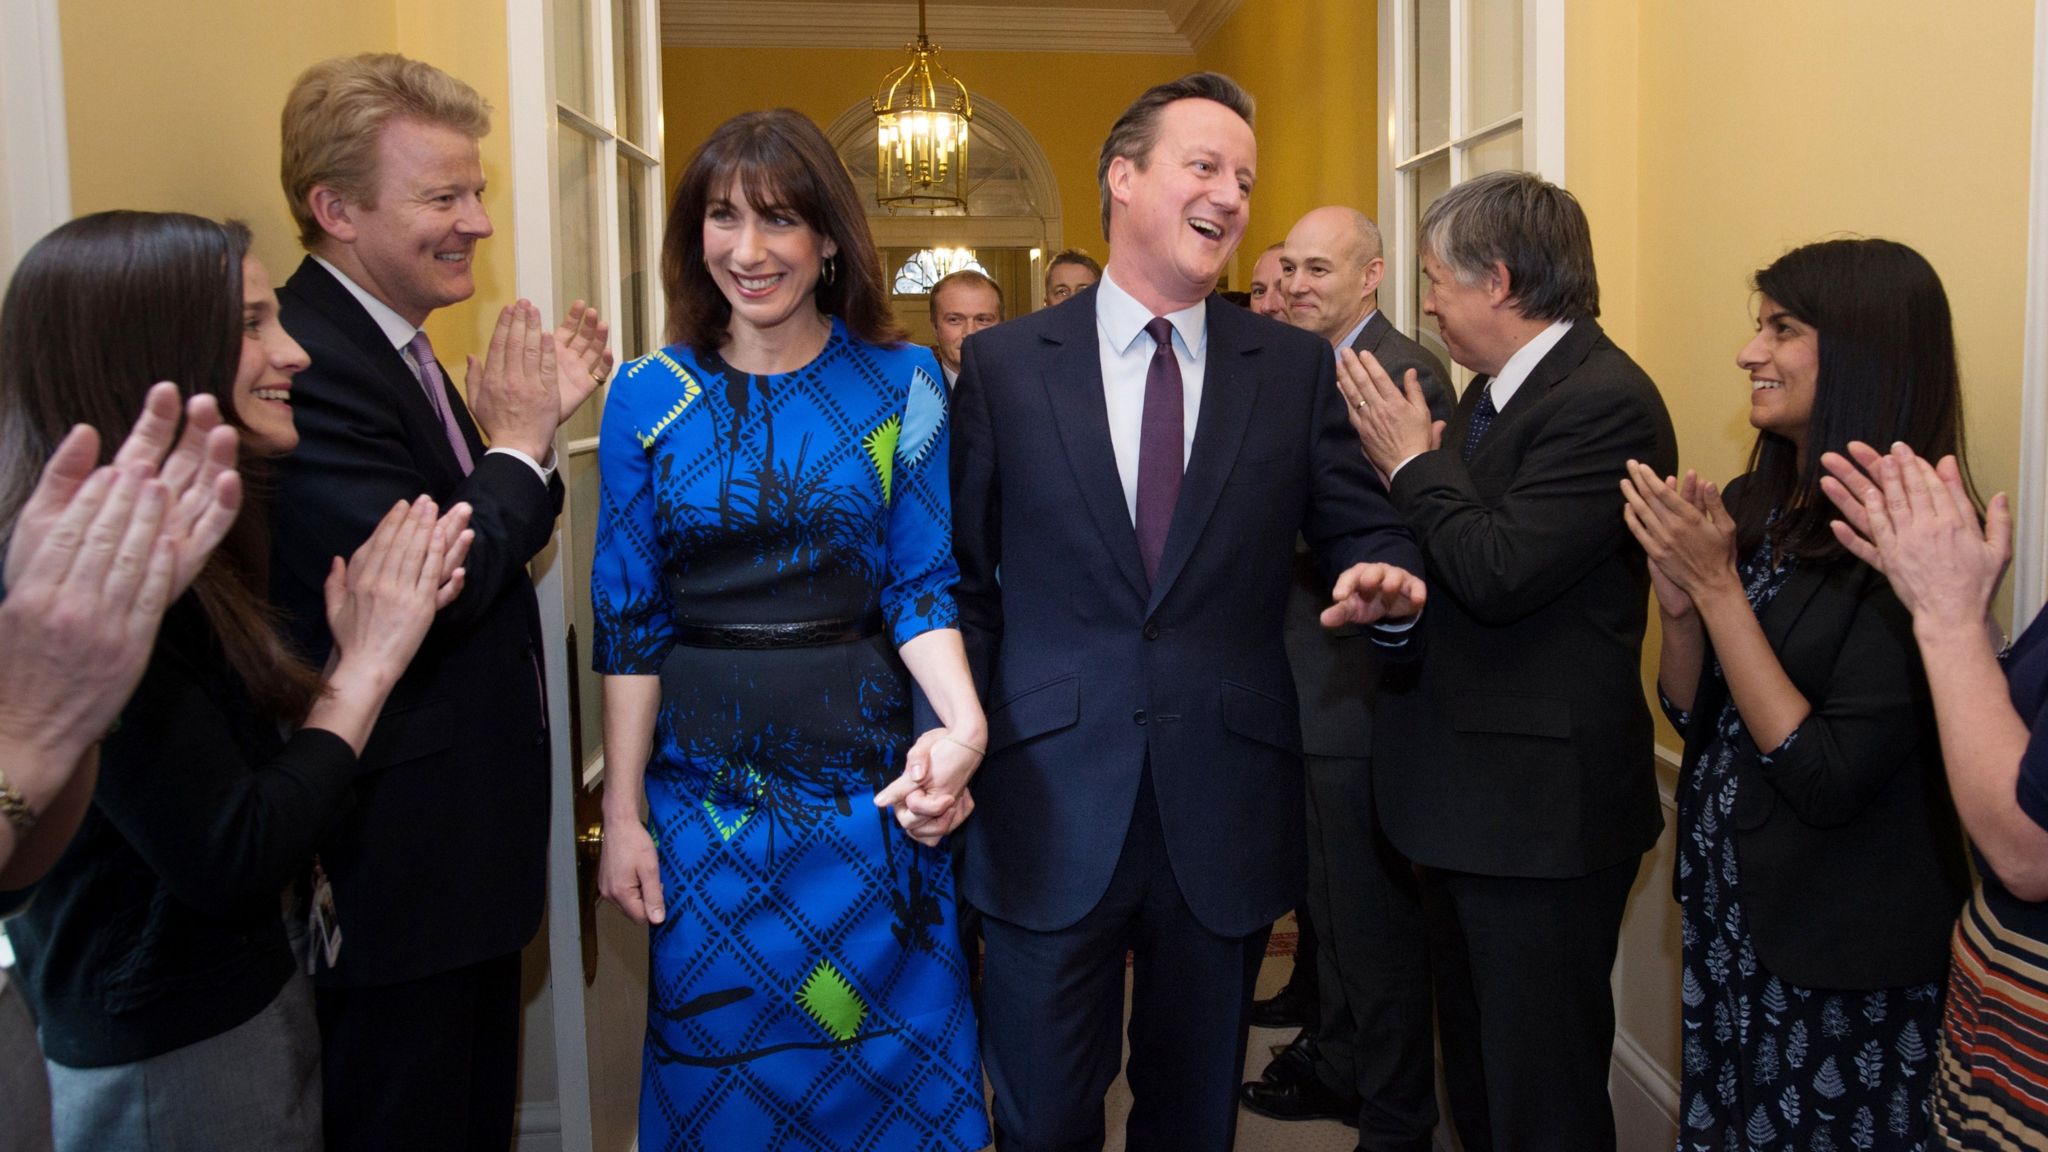 David Cameron and wife Samantha are applauded upon entering Downing Street 